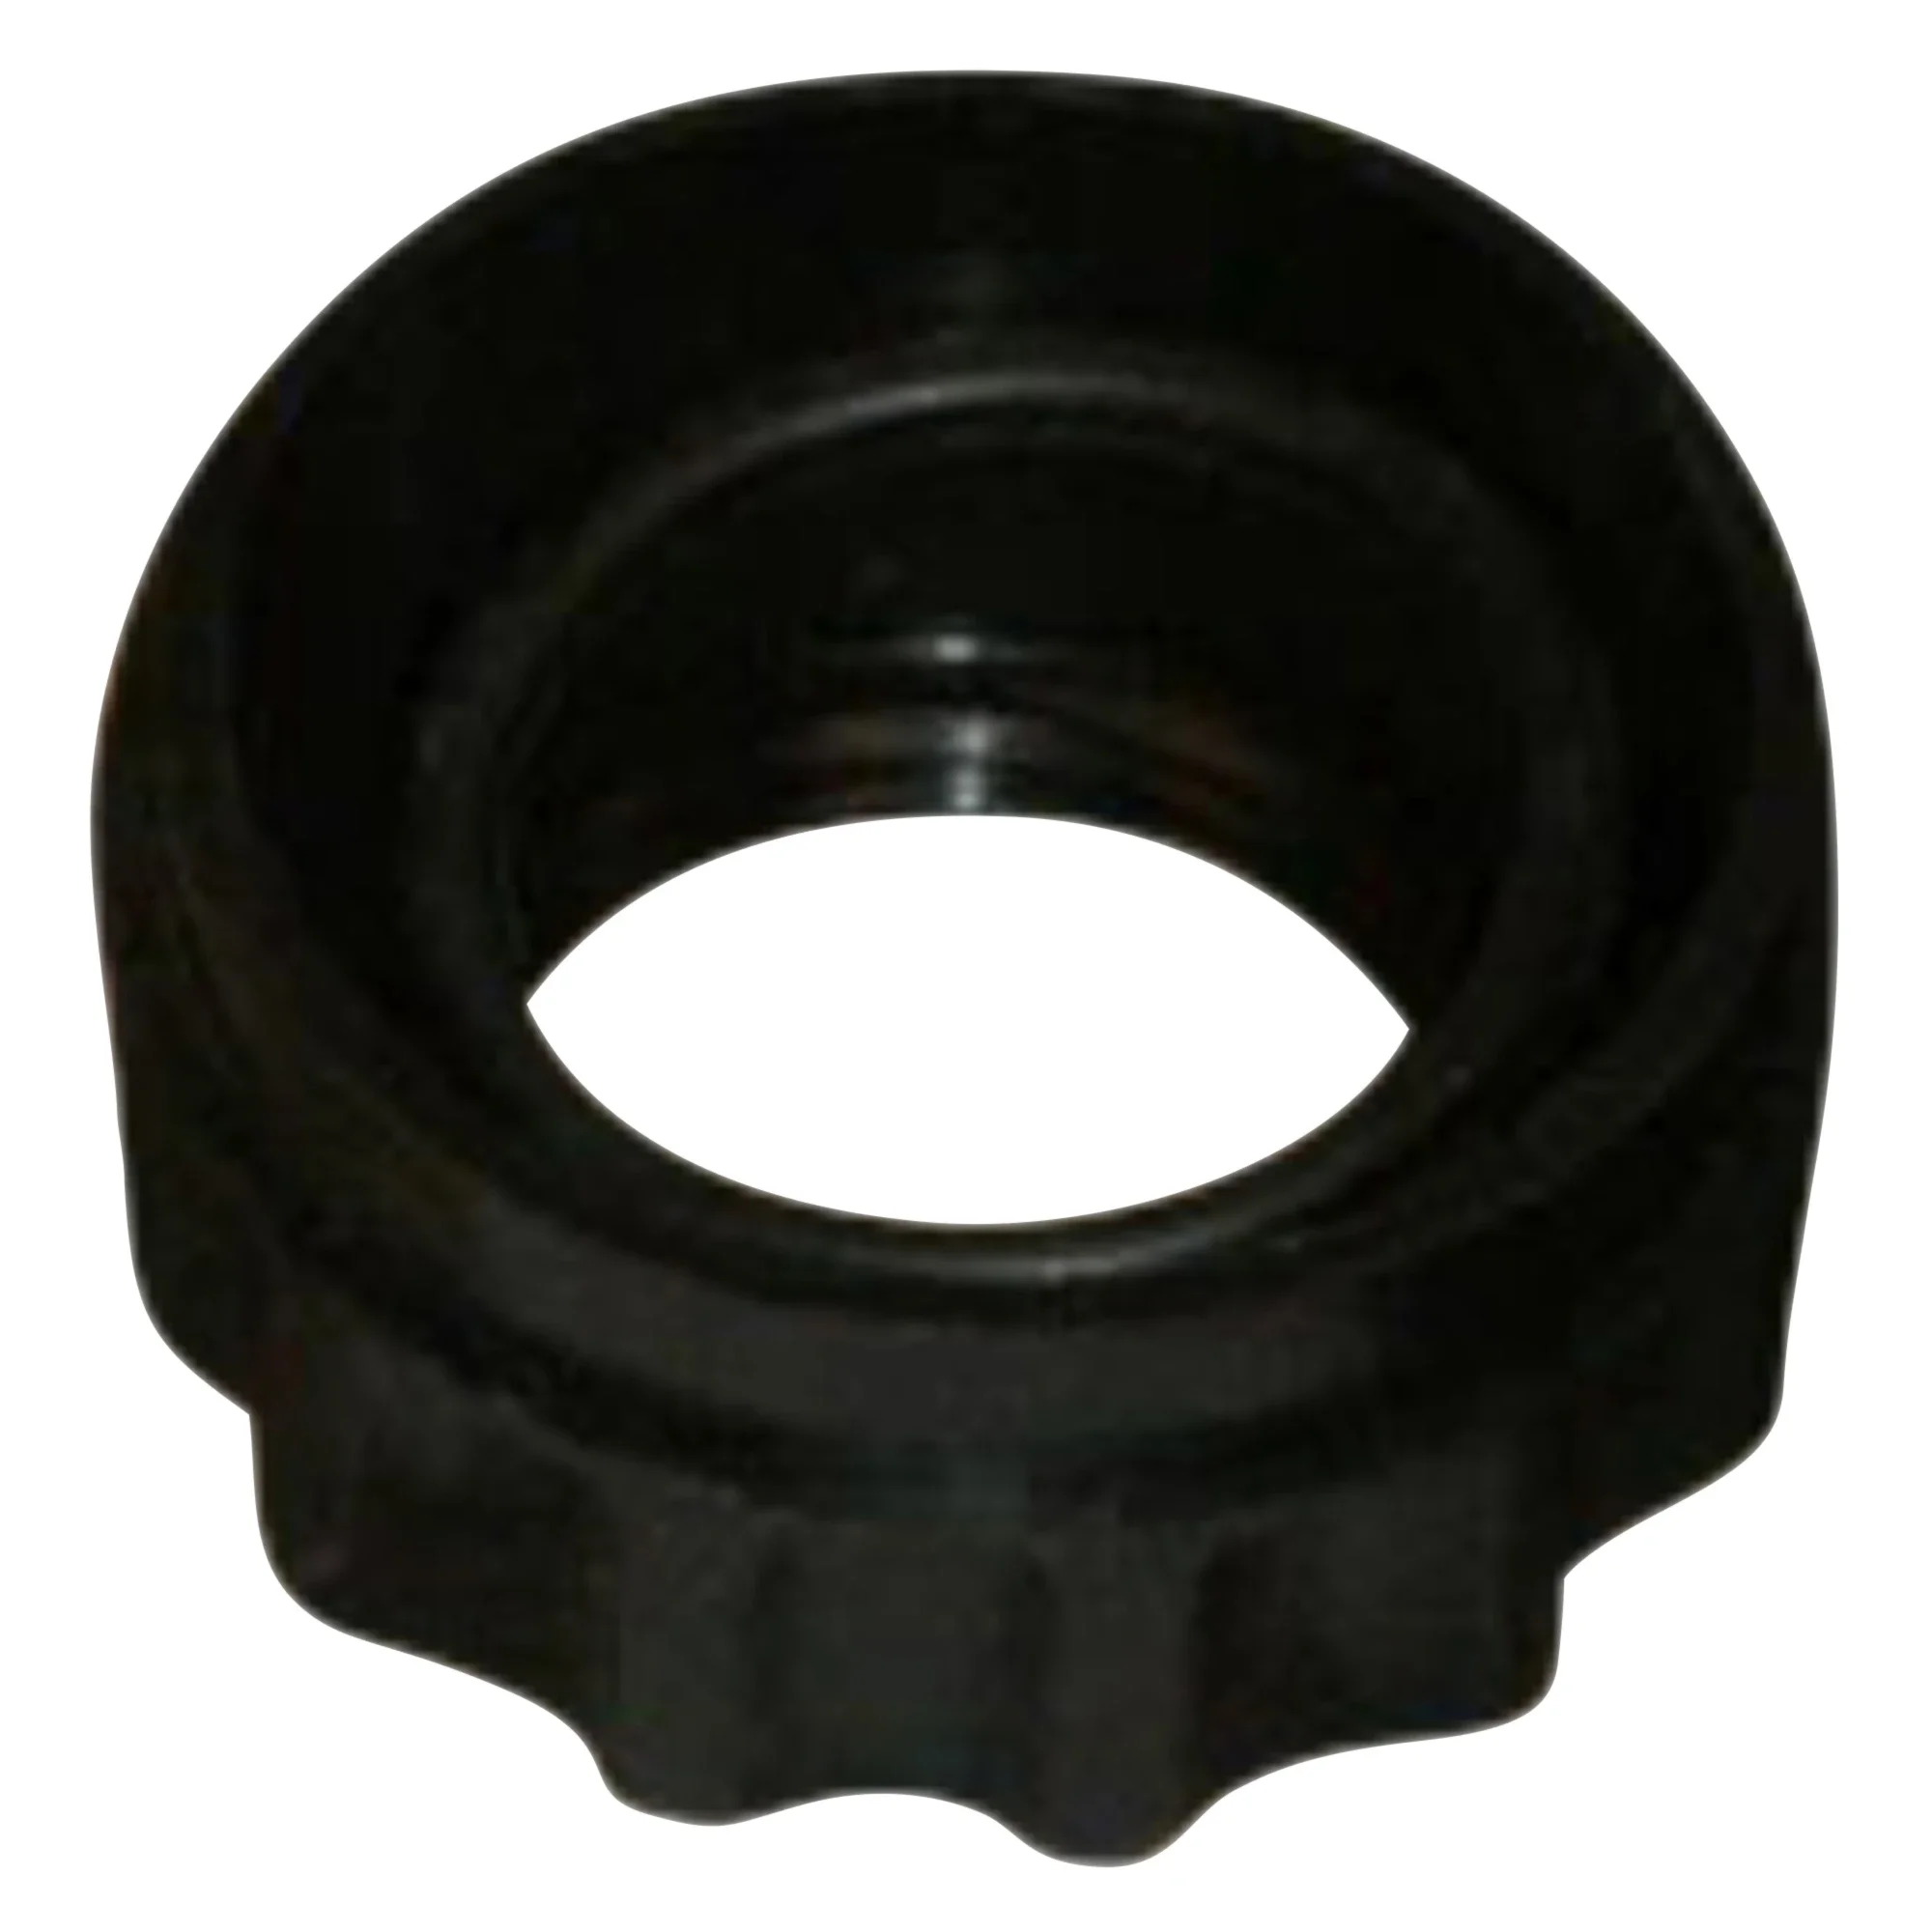 Wastebuilt® Replacement for Curotto-Can Nut, Coil, Main Valve